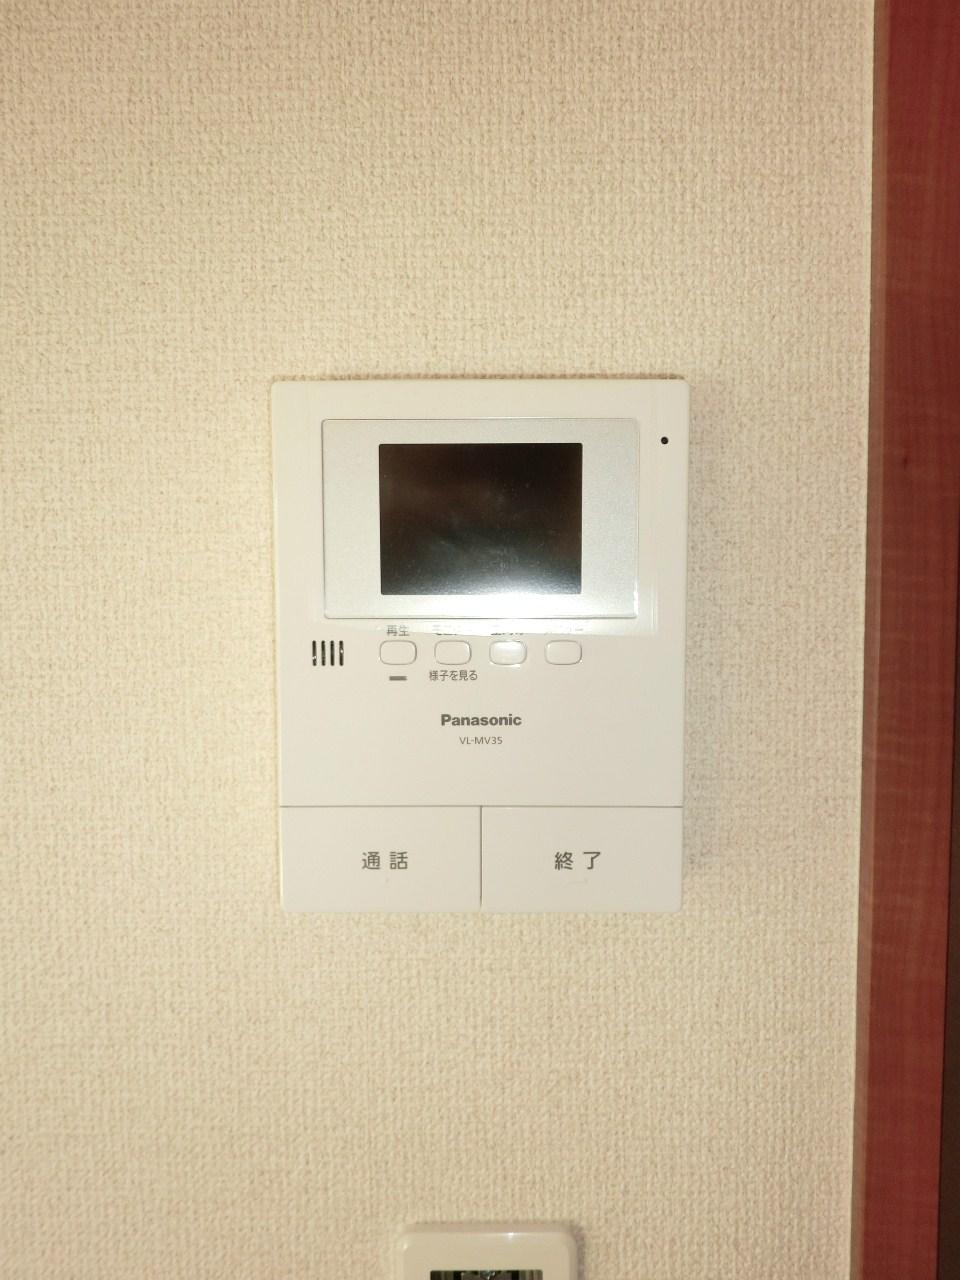 Security equipment. Since the monitor phone with a recording function, If there is a visitor in the absence, It is safe because it is recorded. 